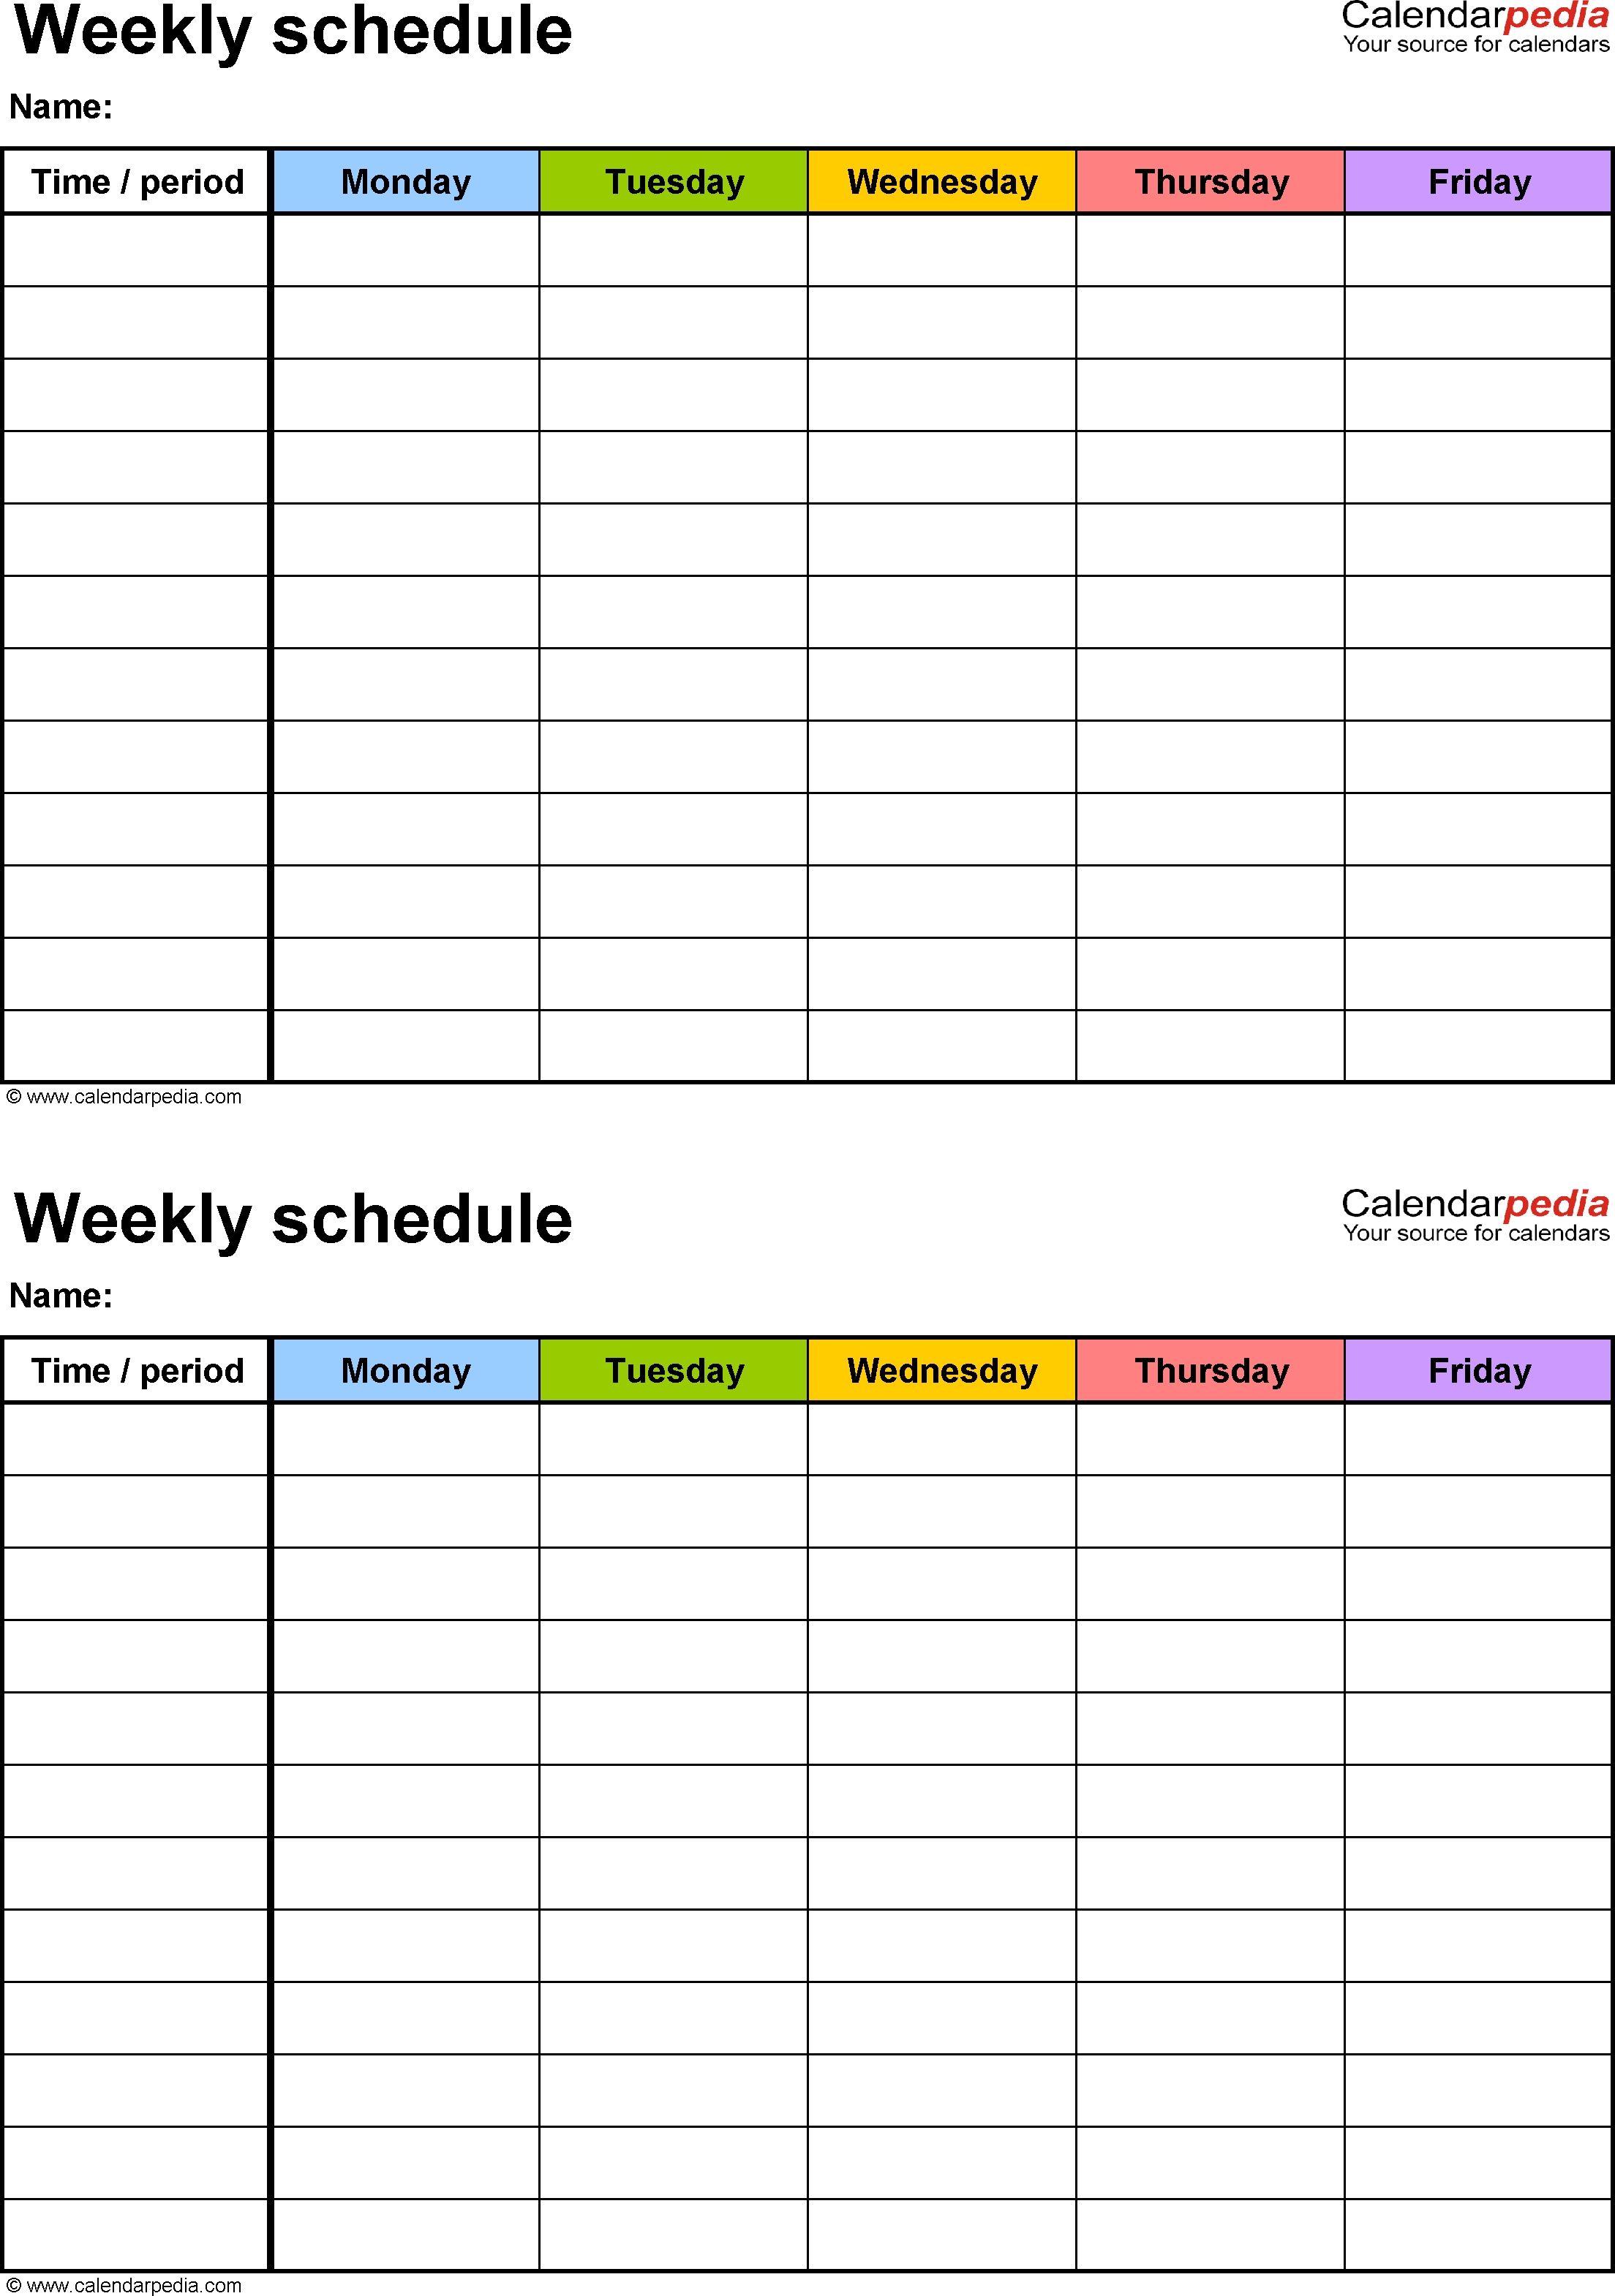 Free Weekly Schedule Templates For Word - 18 Templates with regard to Monday Through Friday Schedule Template Free